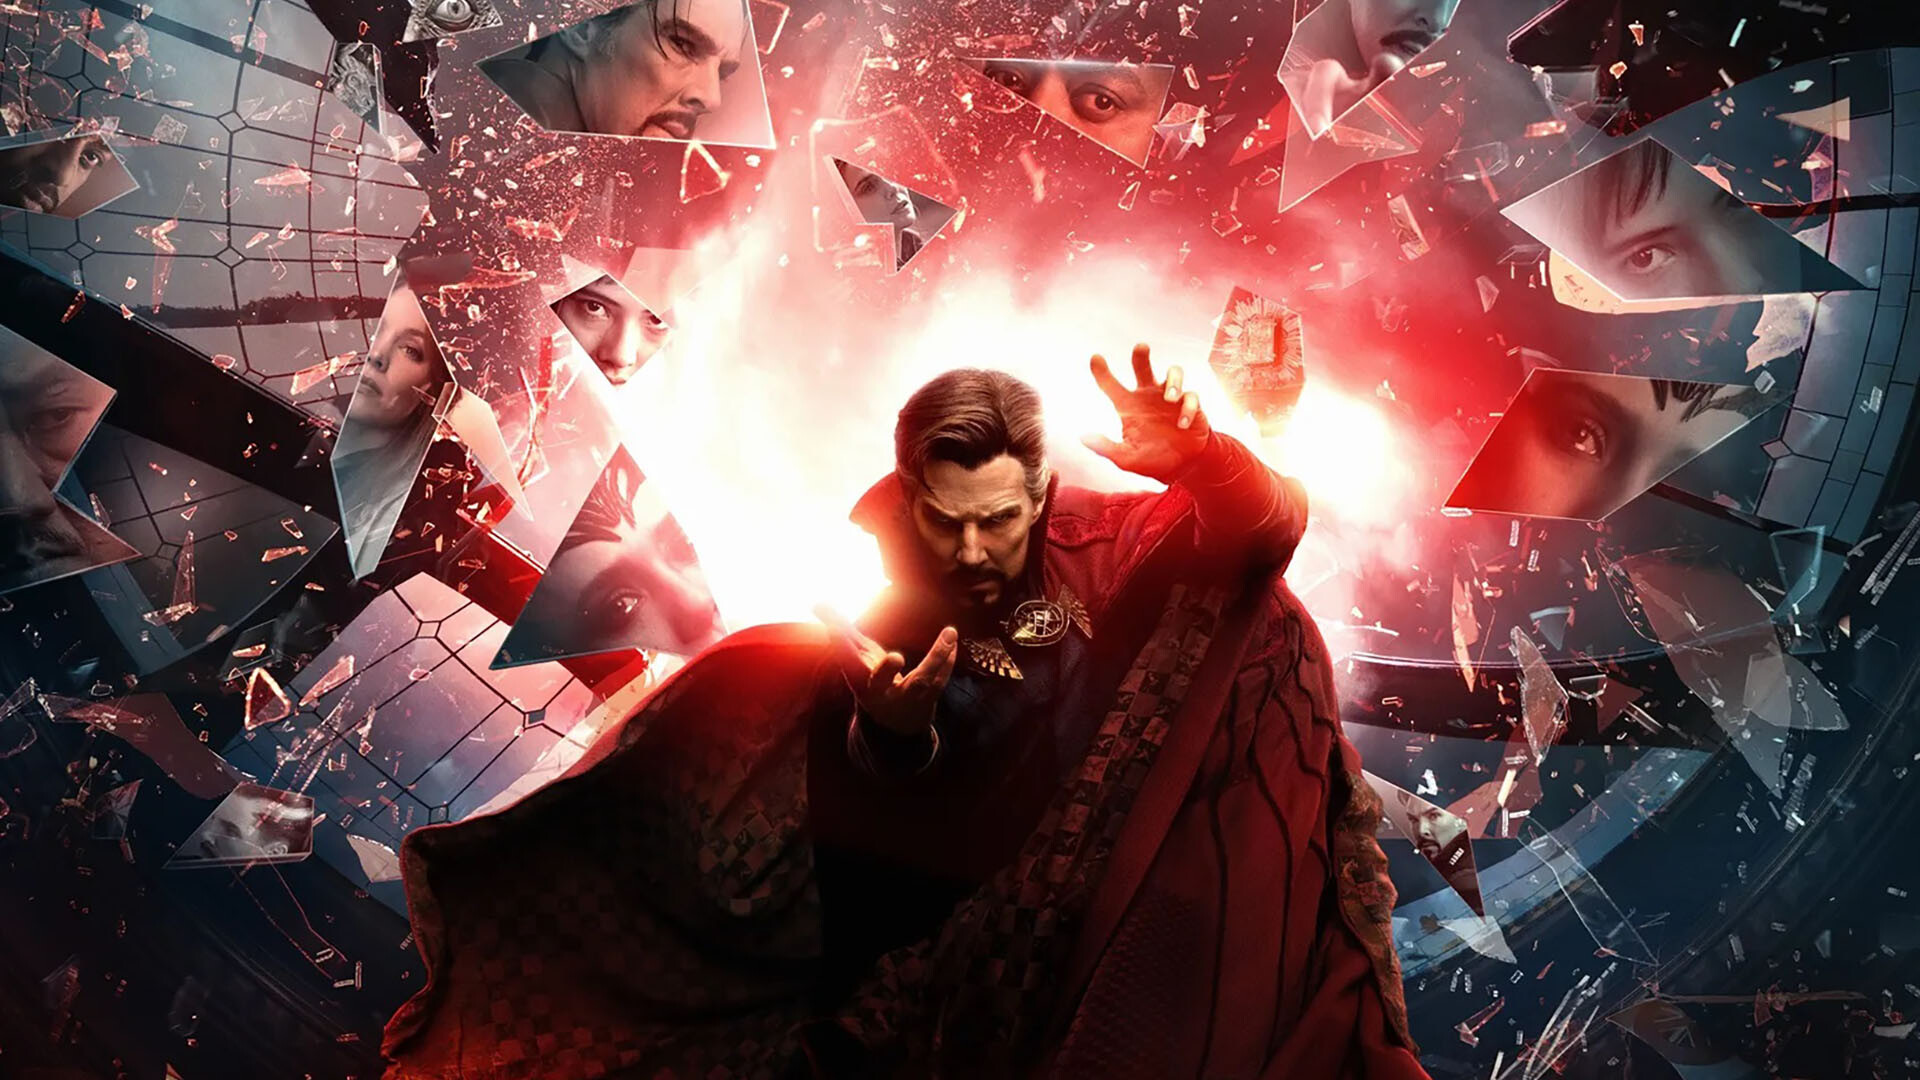 Doctor Strange in the Multiverse of Madness: The first Marvel Cinematic Universe production to have significant horror elements. 1920x1080 Full HD Background.